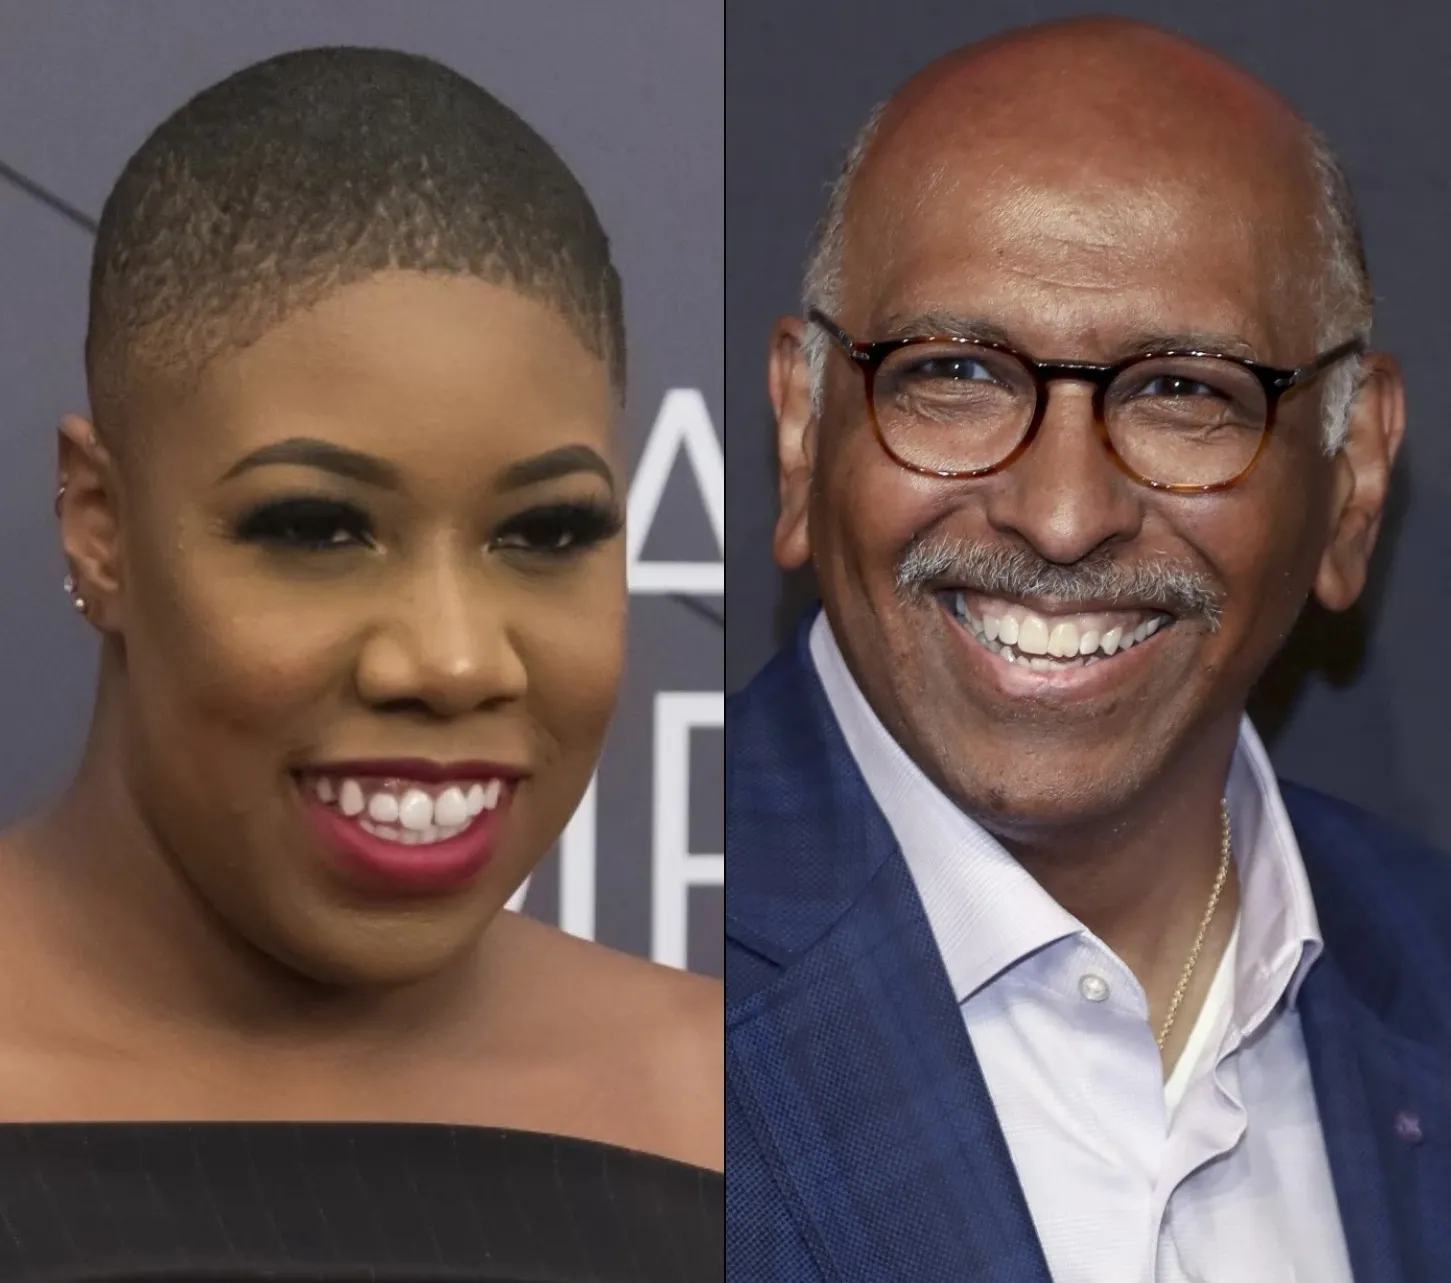 Symone Sanders, Michael Steele tapped as co-hosts of new MSNBC election-season show